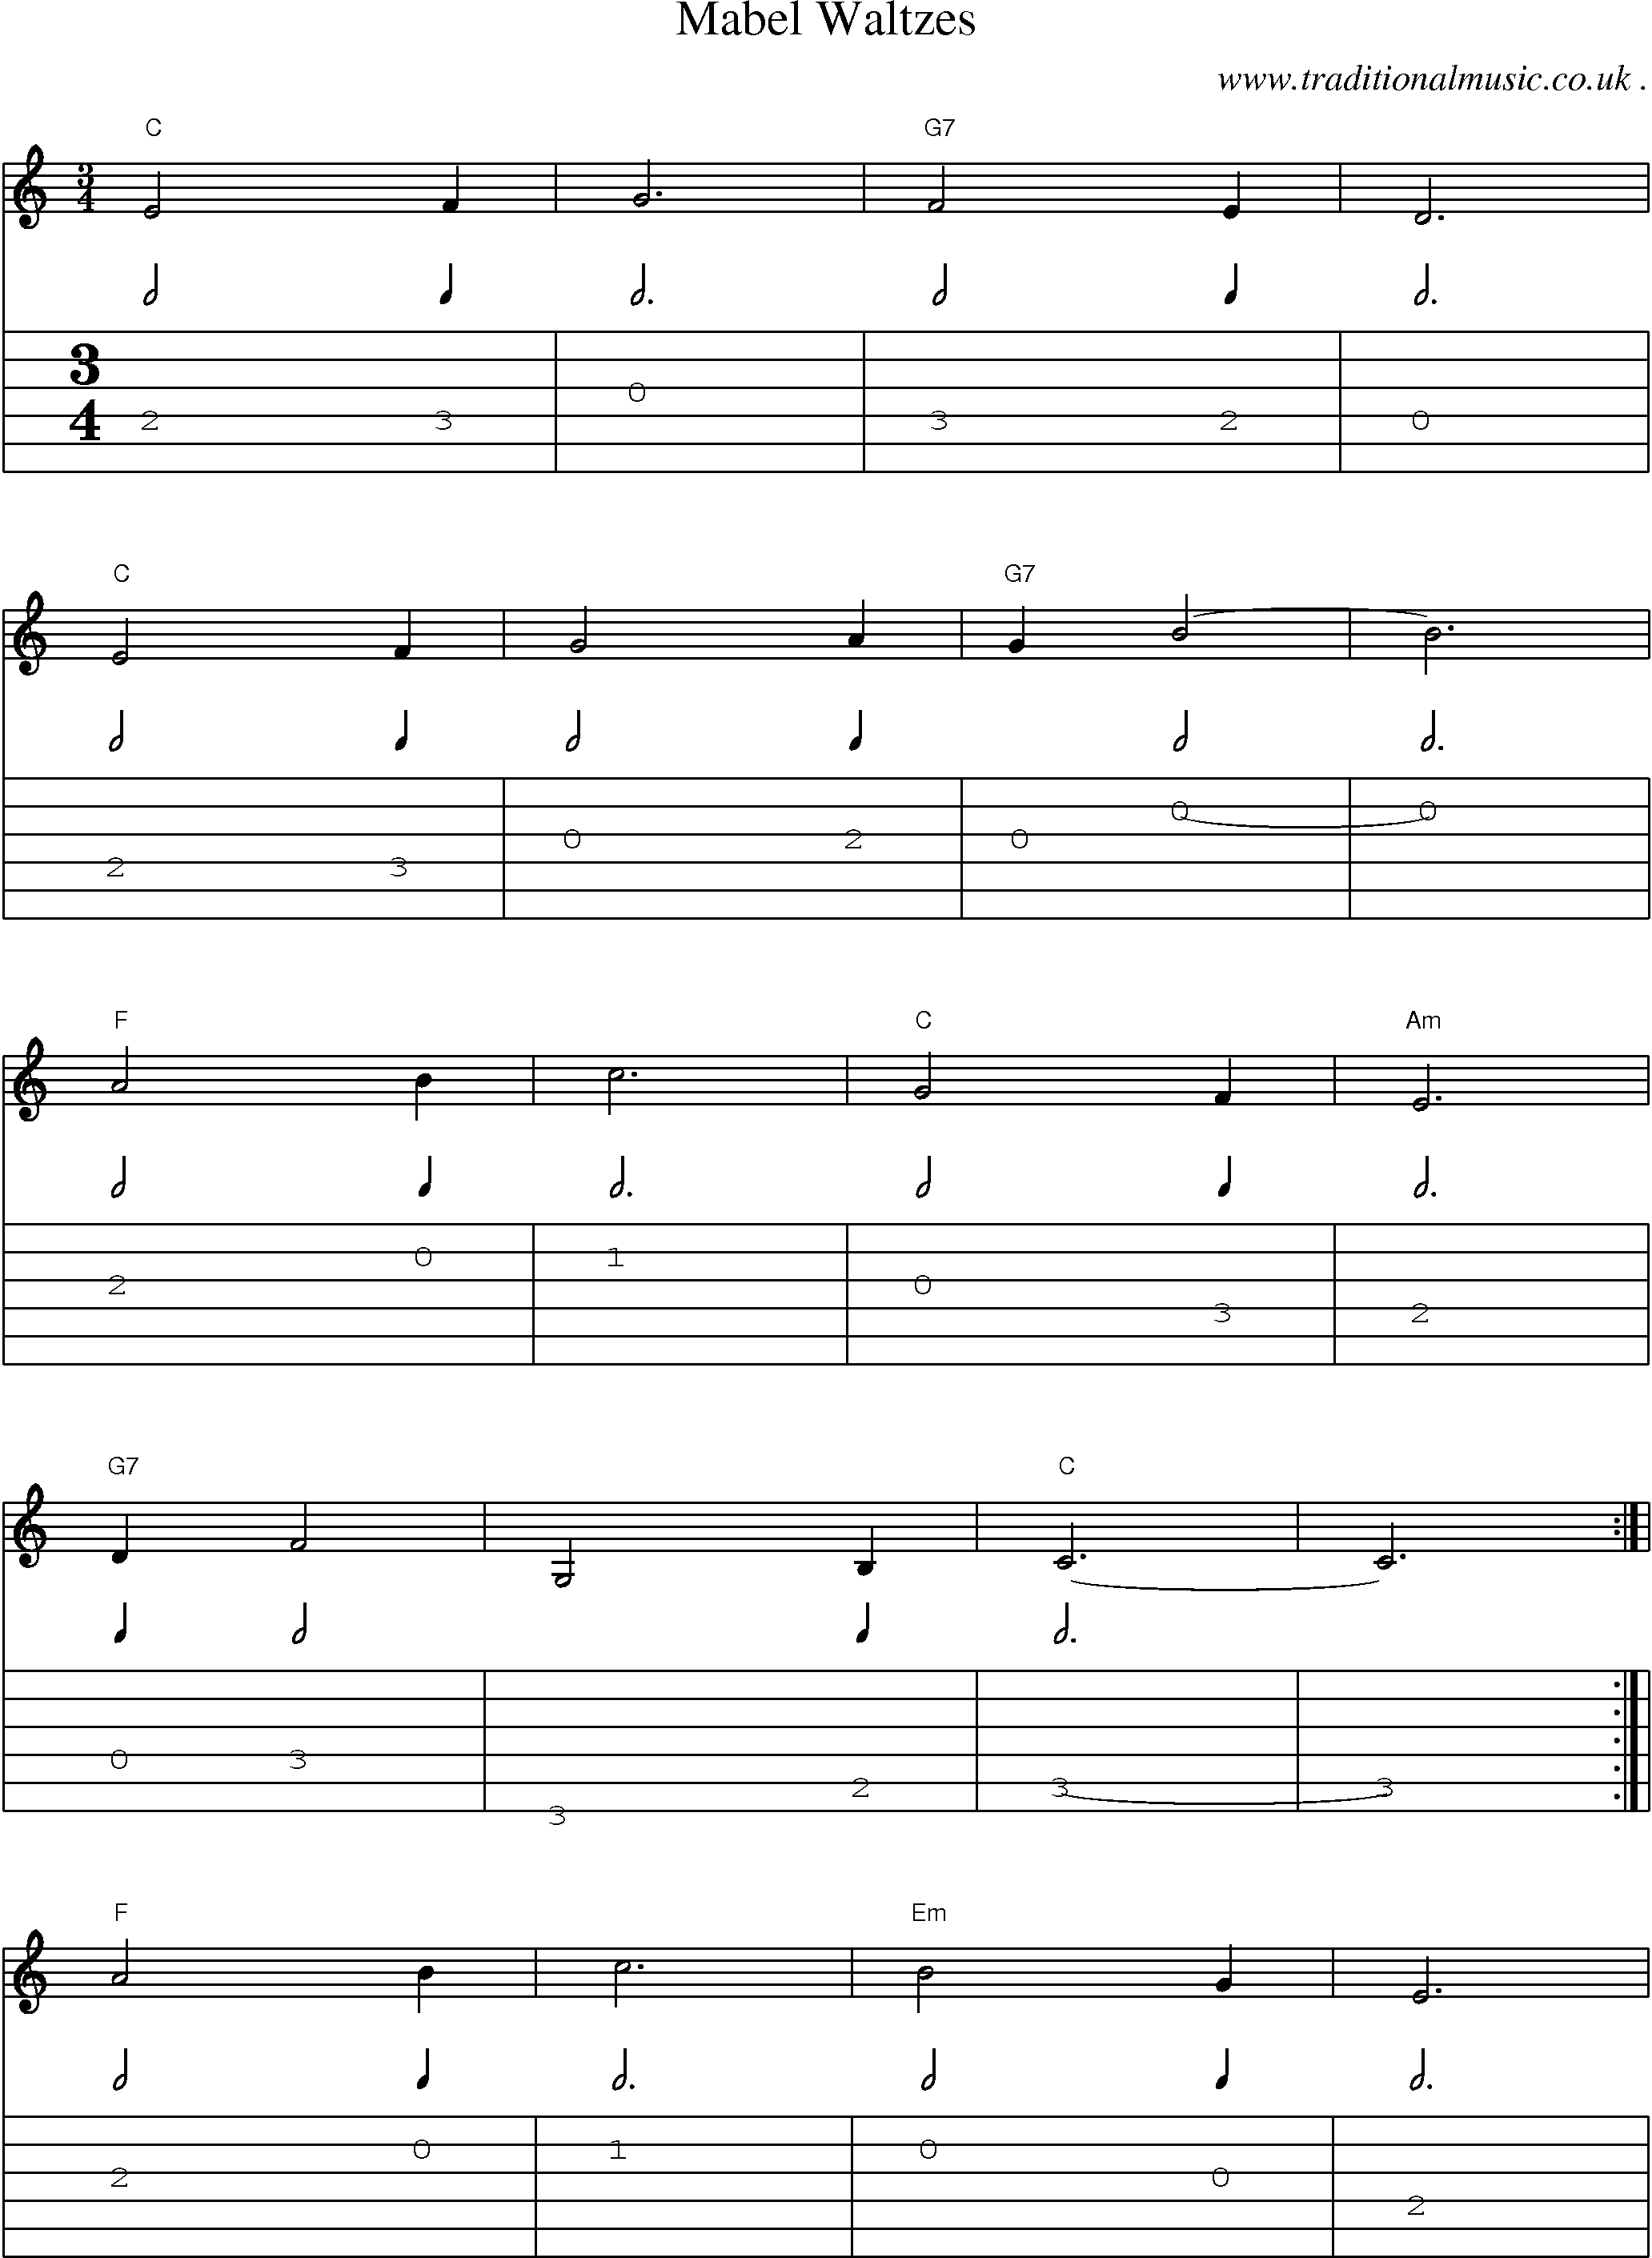 Sheet-Music and Guitar Tabs for Mabel Waltzes